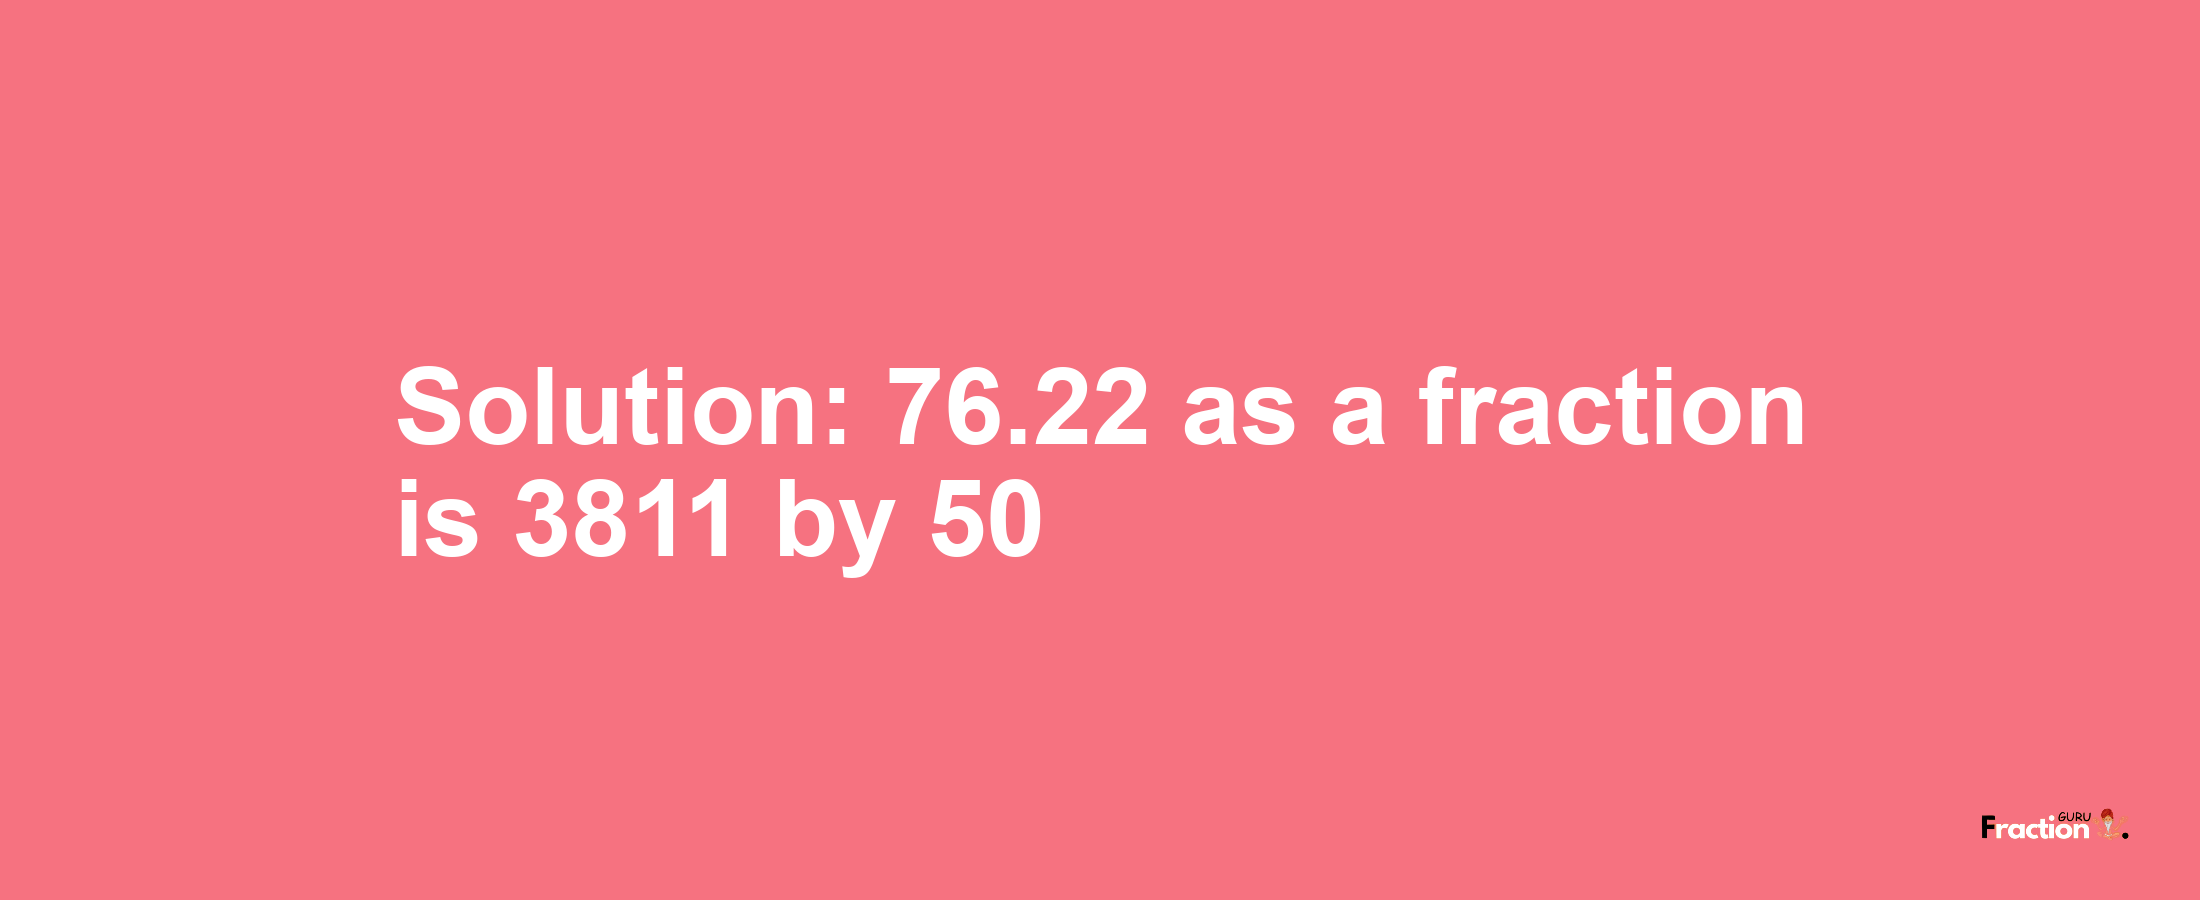 Solution:76.22 as a fraction is 3811/50